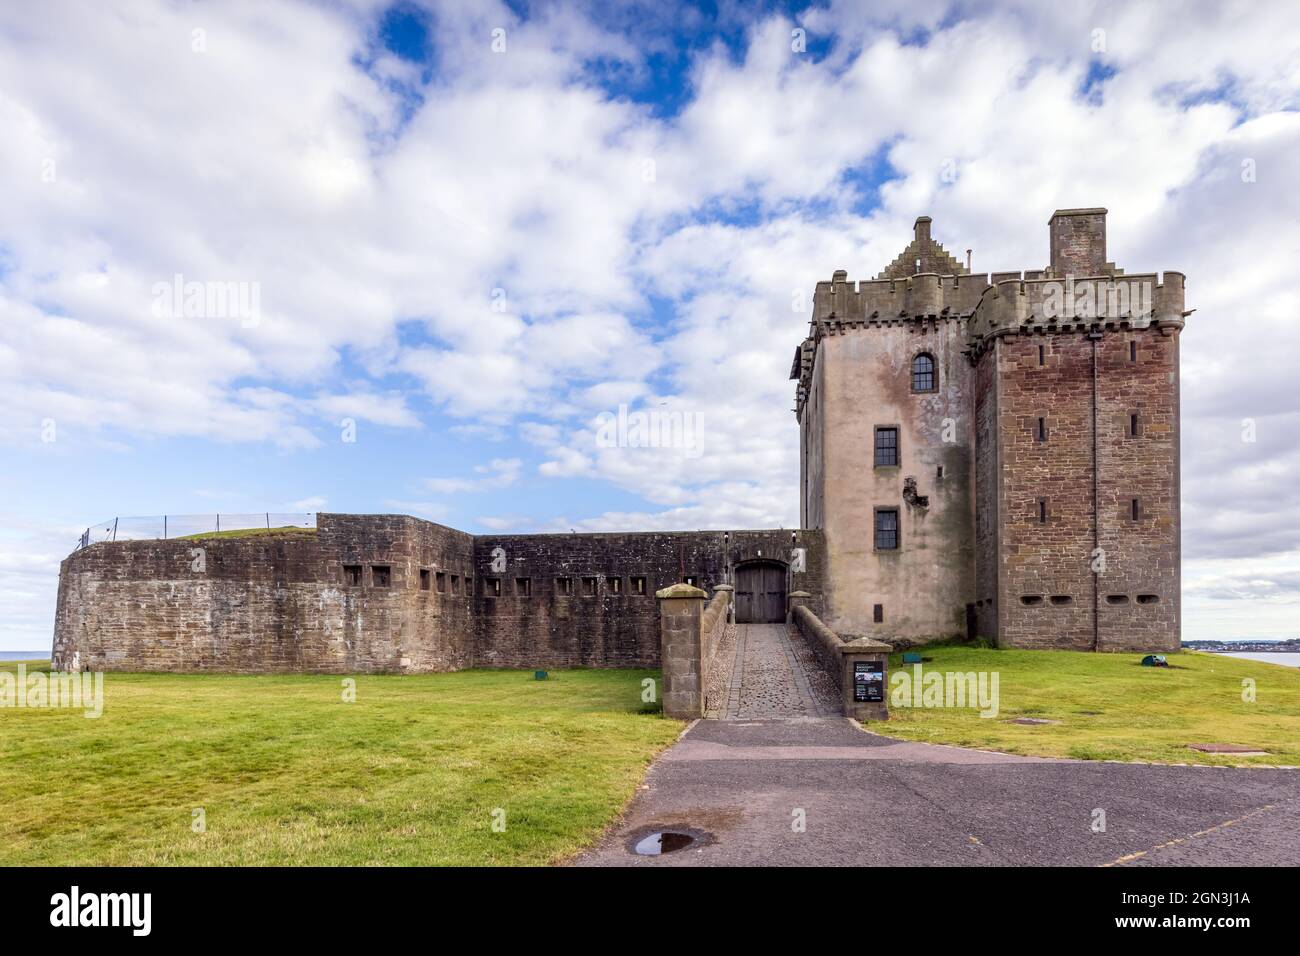 Broughty Castle is a historic castle on the banks of the river Tay in Broughty Ferry, Dundee, Scotland. Stock Photo